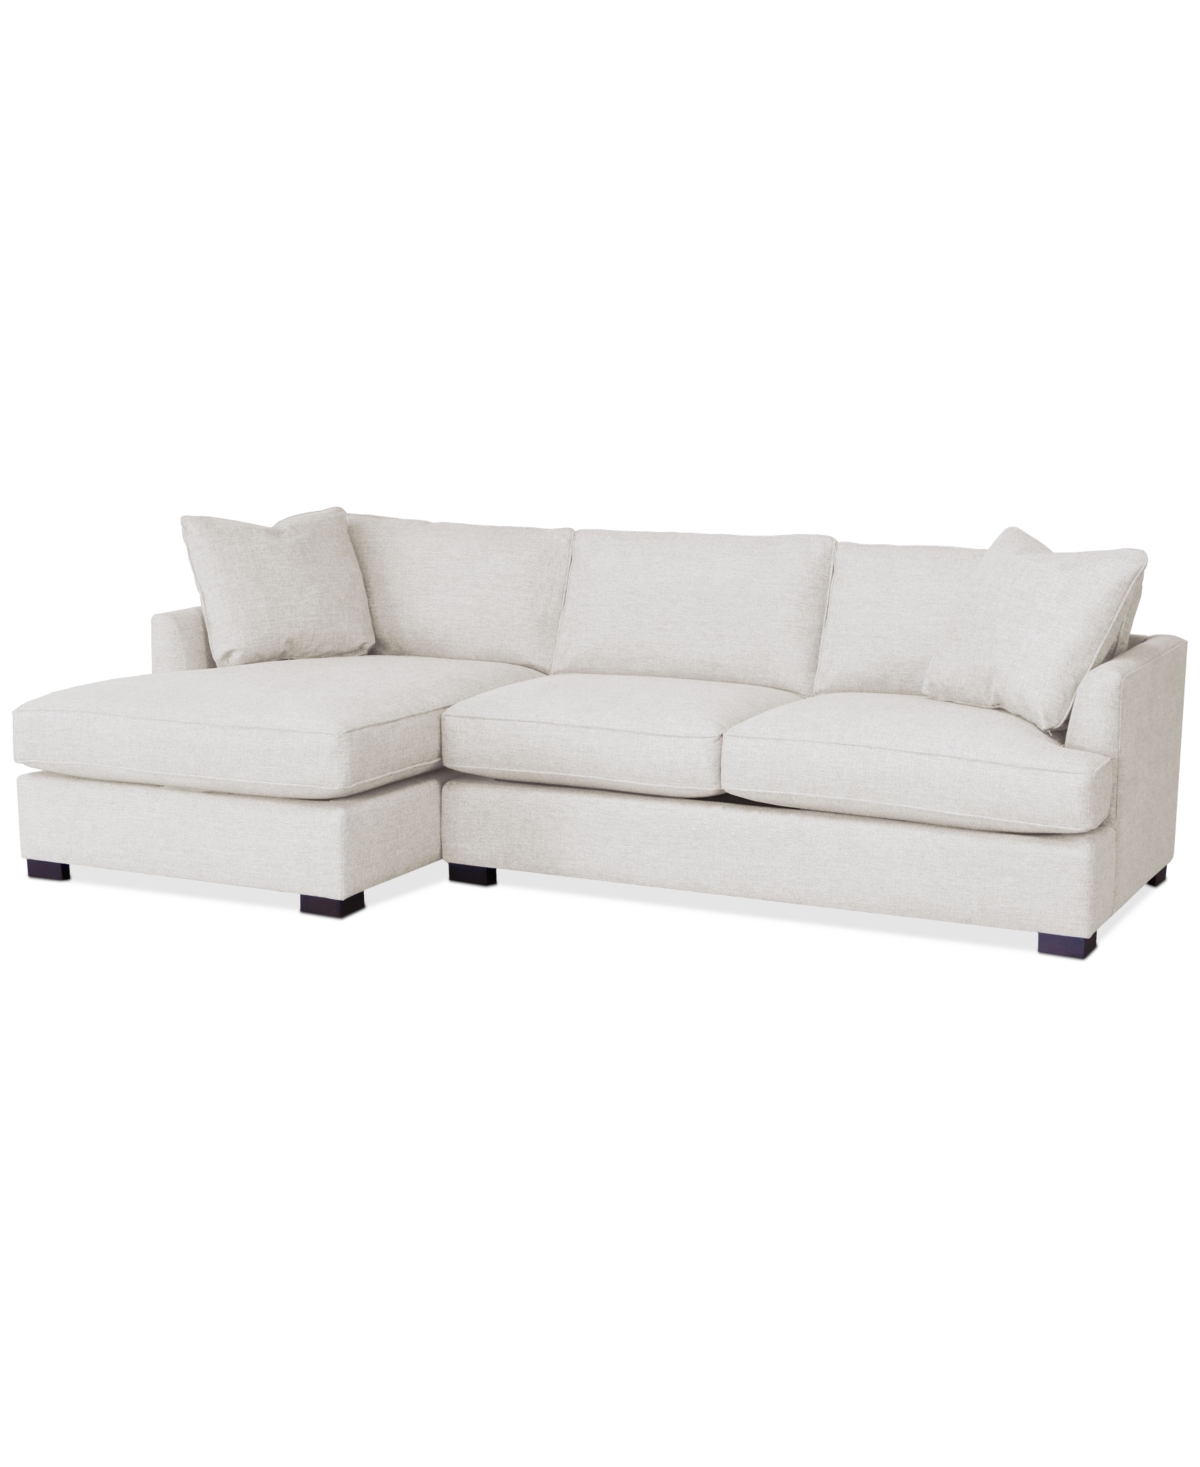 Furniture Nightford 111" 2-pc. Fabric Chaise Sectional, Created For Macy's In Dove